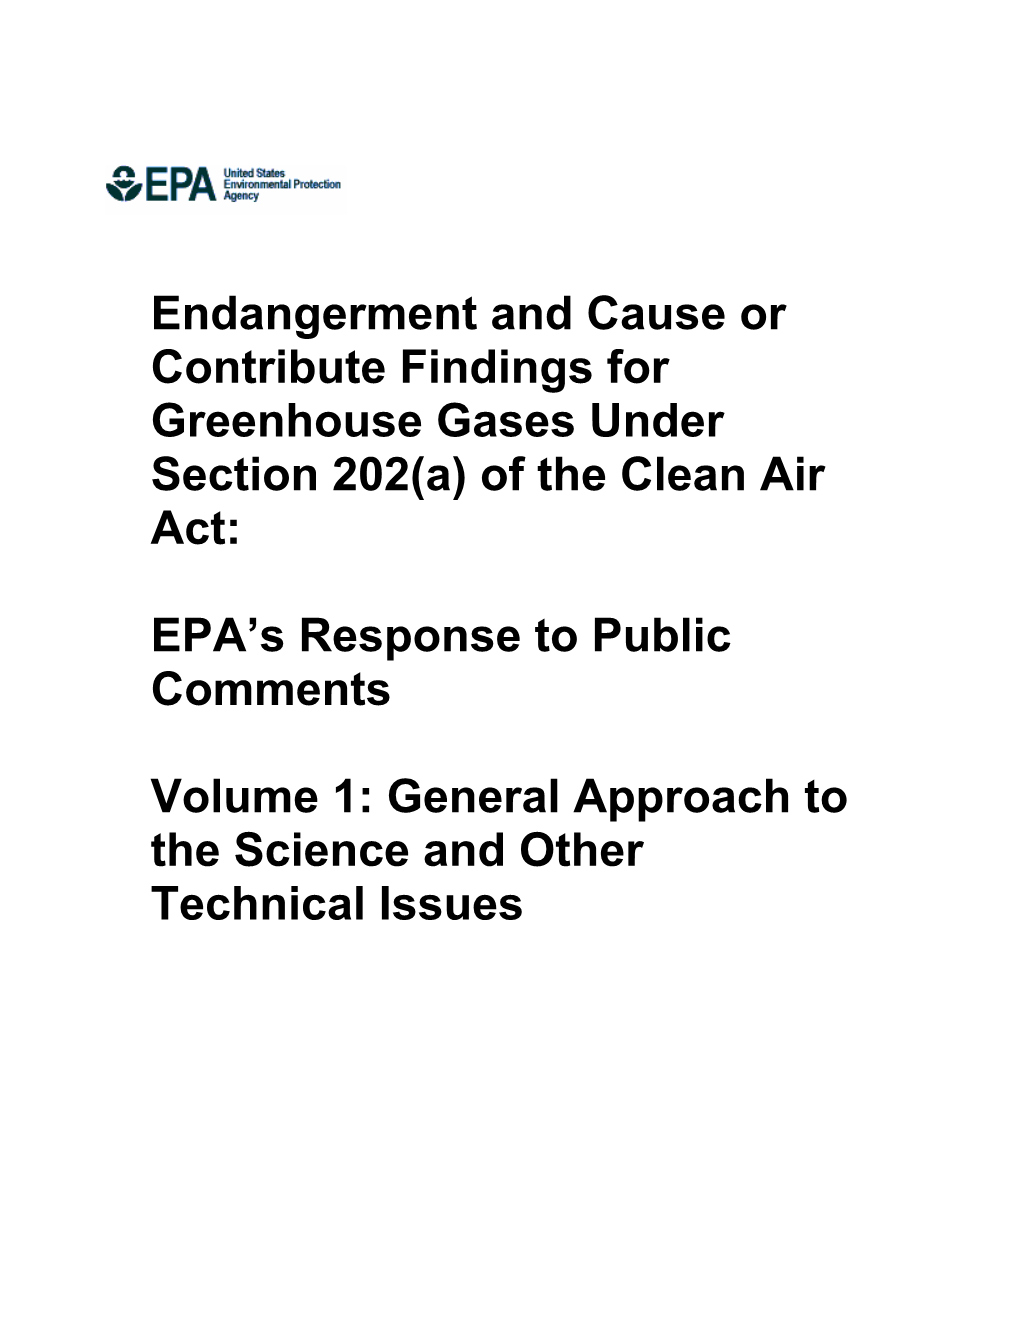 Endangerment and Cause Or Contribute Findings for Greenhouse Gases Under Section 202(A) of the Clean Air Act